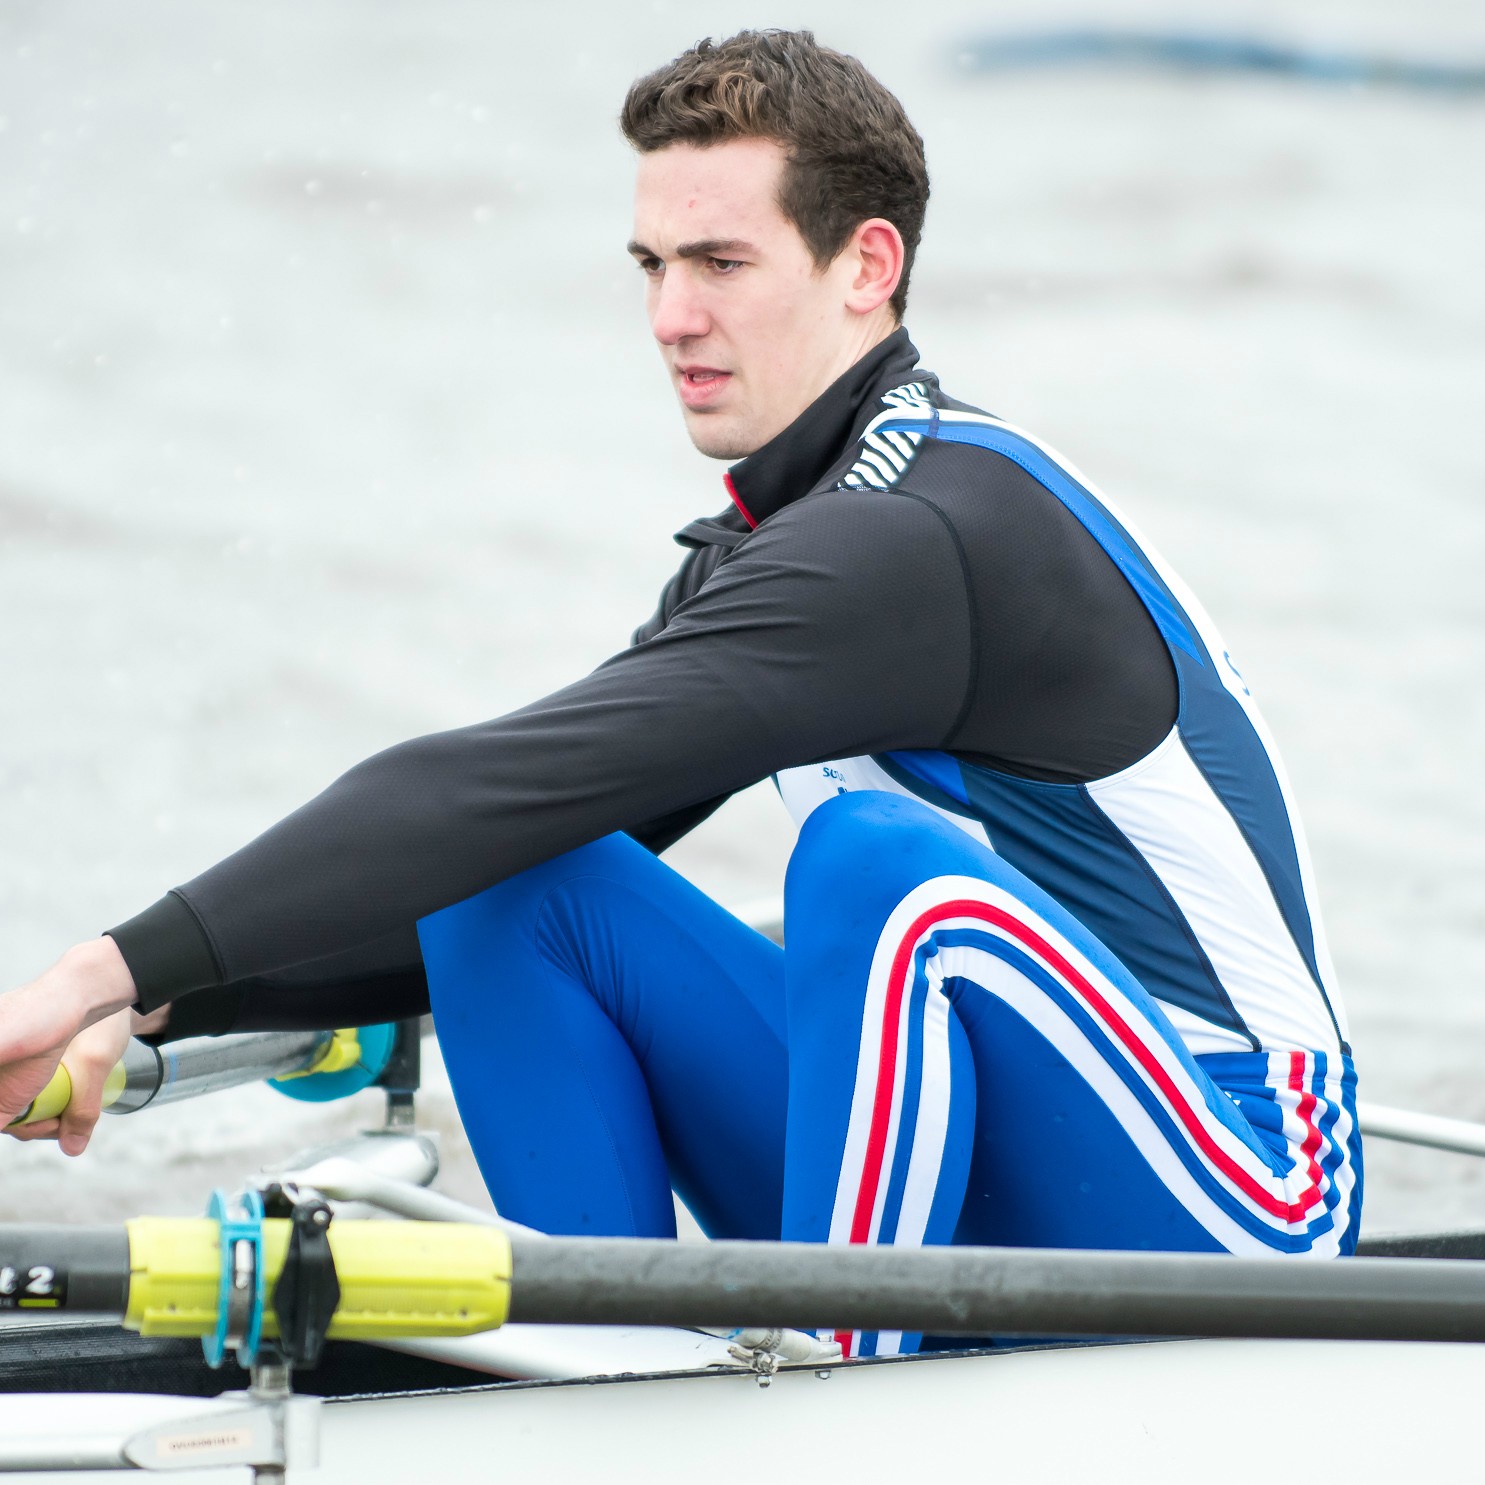 Josh Armstrong has now won World rowing gold at junior and U23 levels.